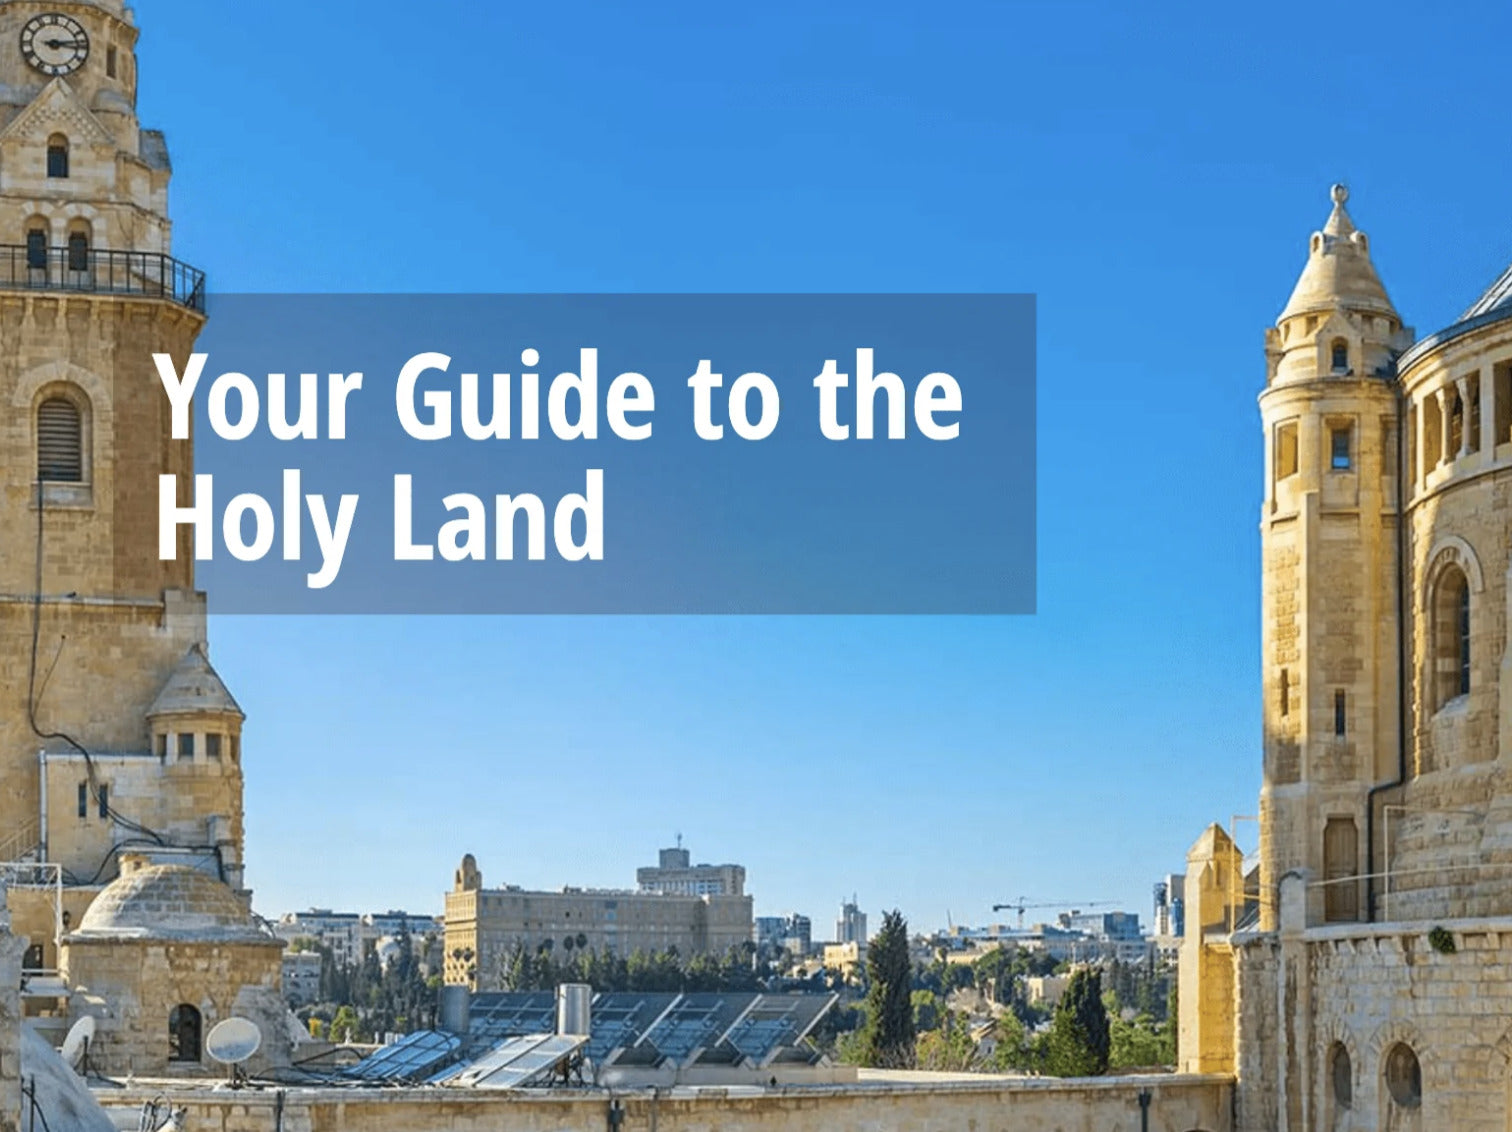 Christian Pilgrim Group Tours to the Holy Land, Denver to Bethlehem, Catholic Priest Lead Week Long Sight seeing Church and Sites of Jesus Christ